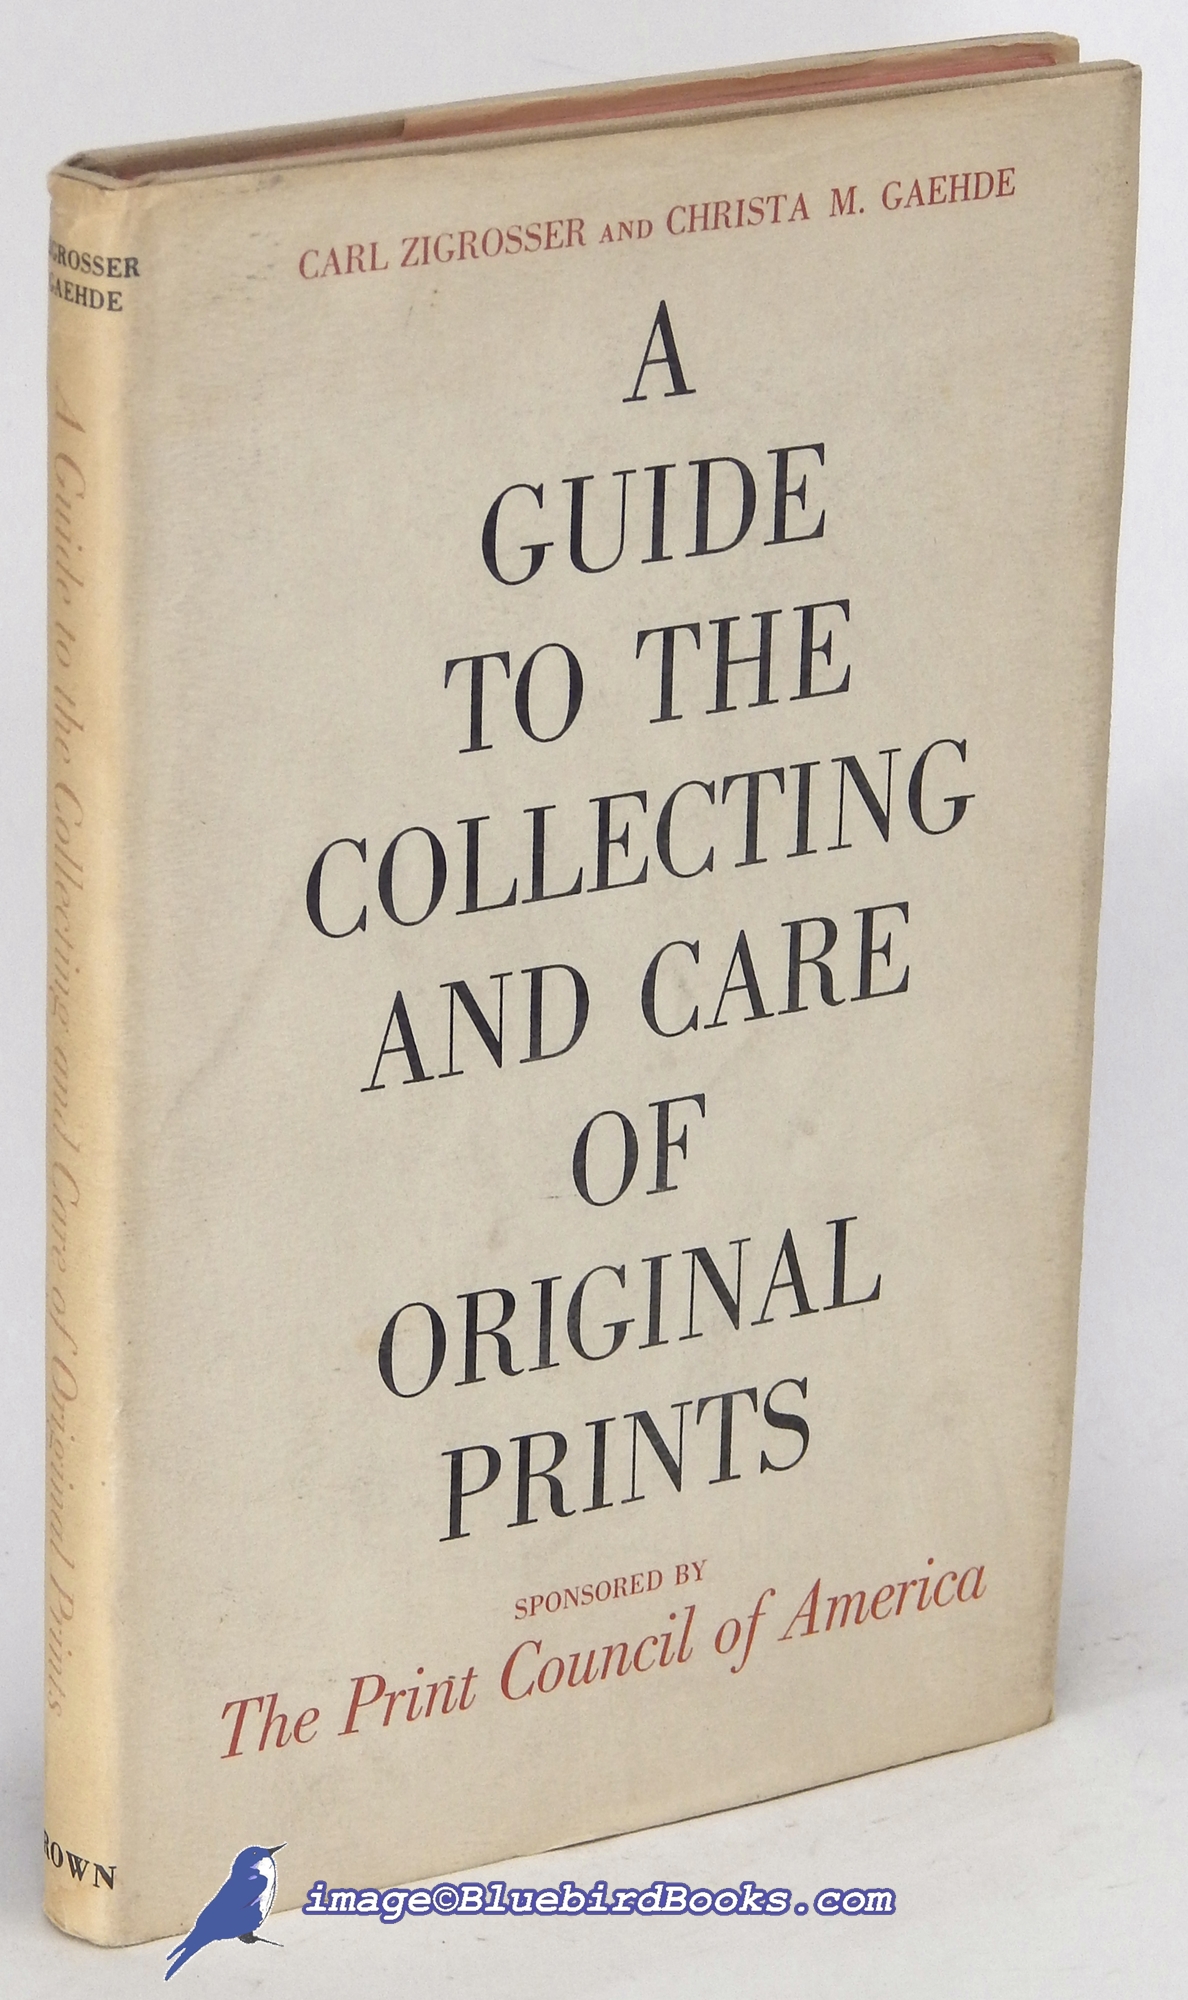 ZIGROSSER, CARL; GAEHDE, CHRISTA M. - A Guide to the Collecting and Care of Original Prints